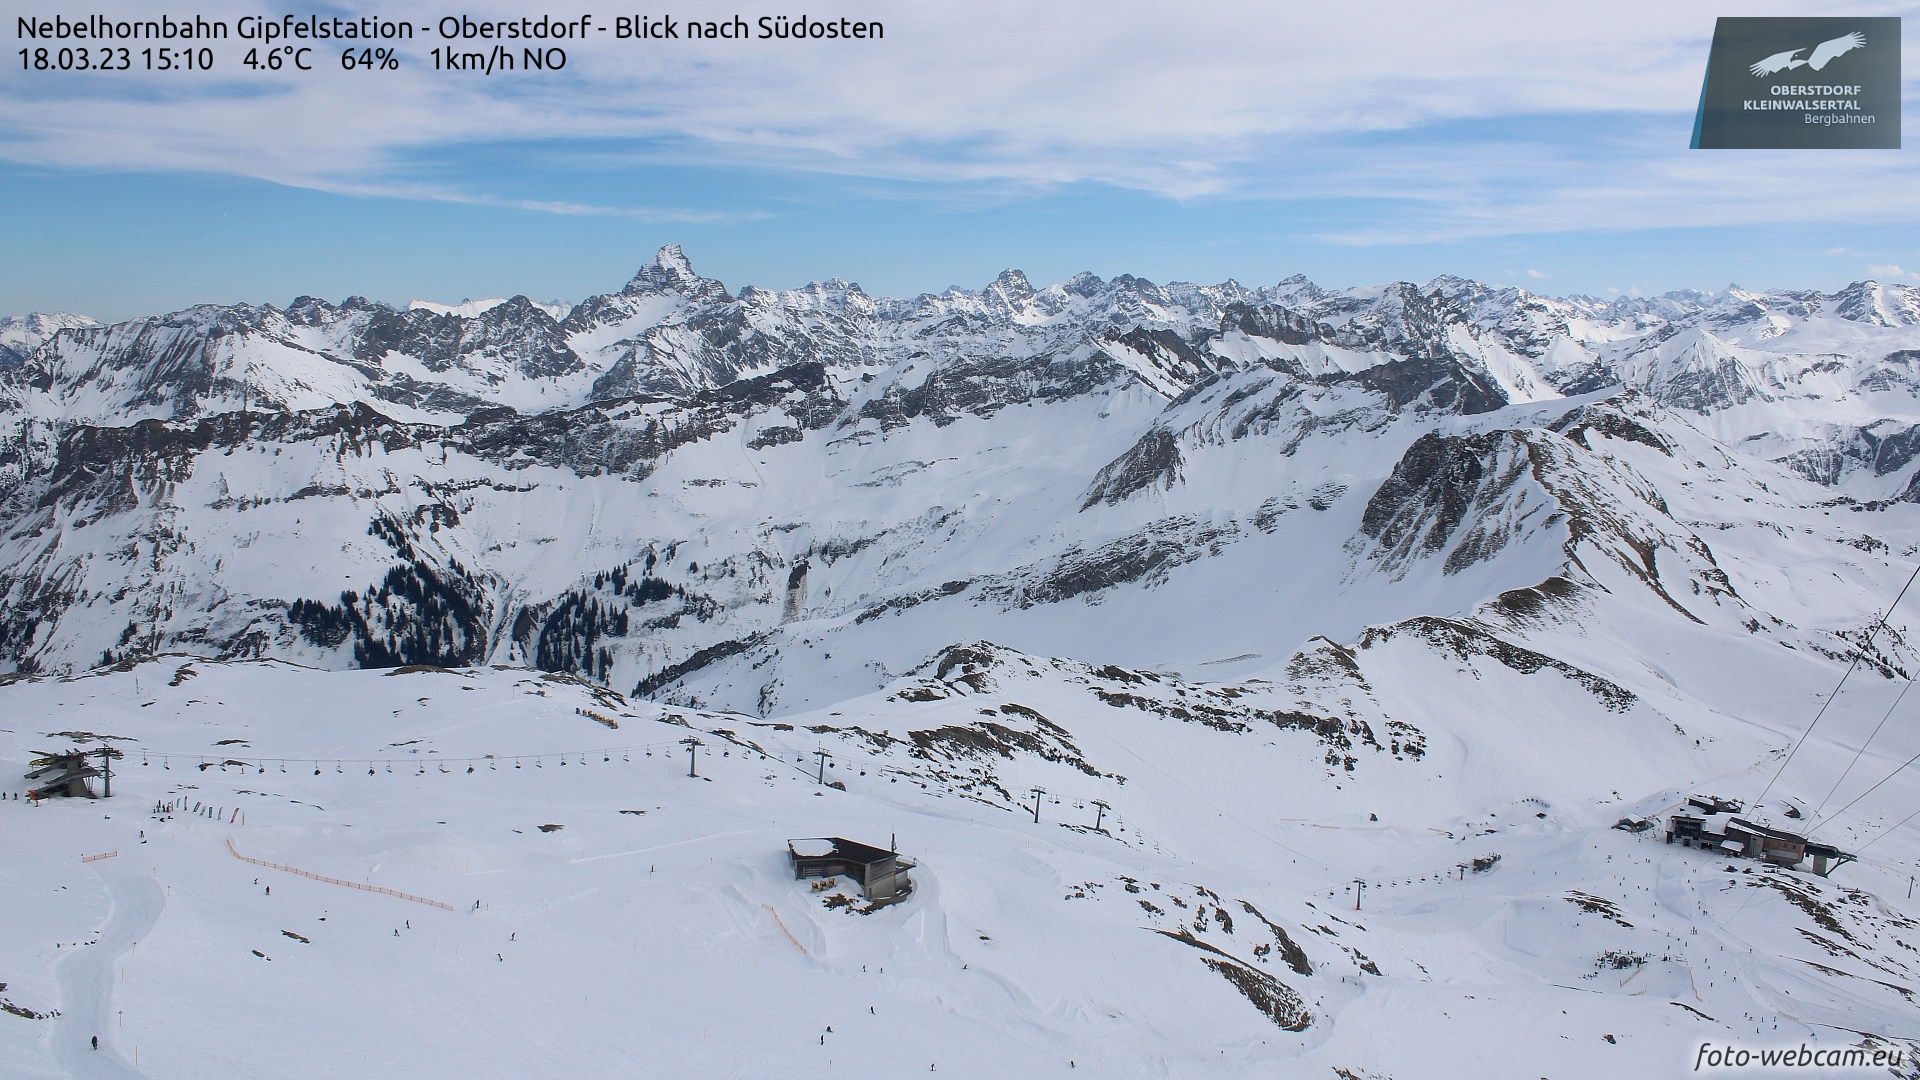 Increasing high clouds from the west today (Oberstdorf, foto-webcam.eu)